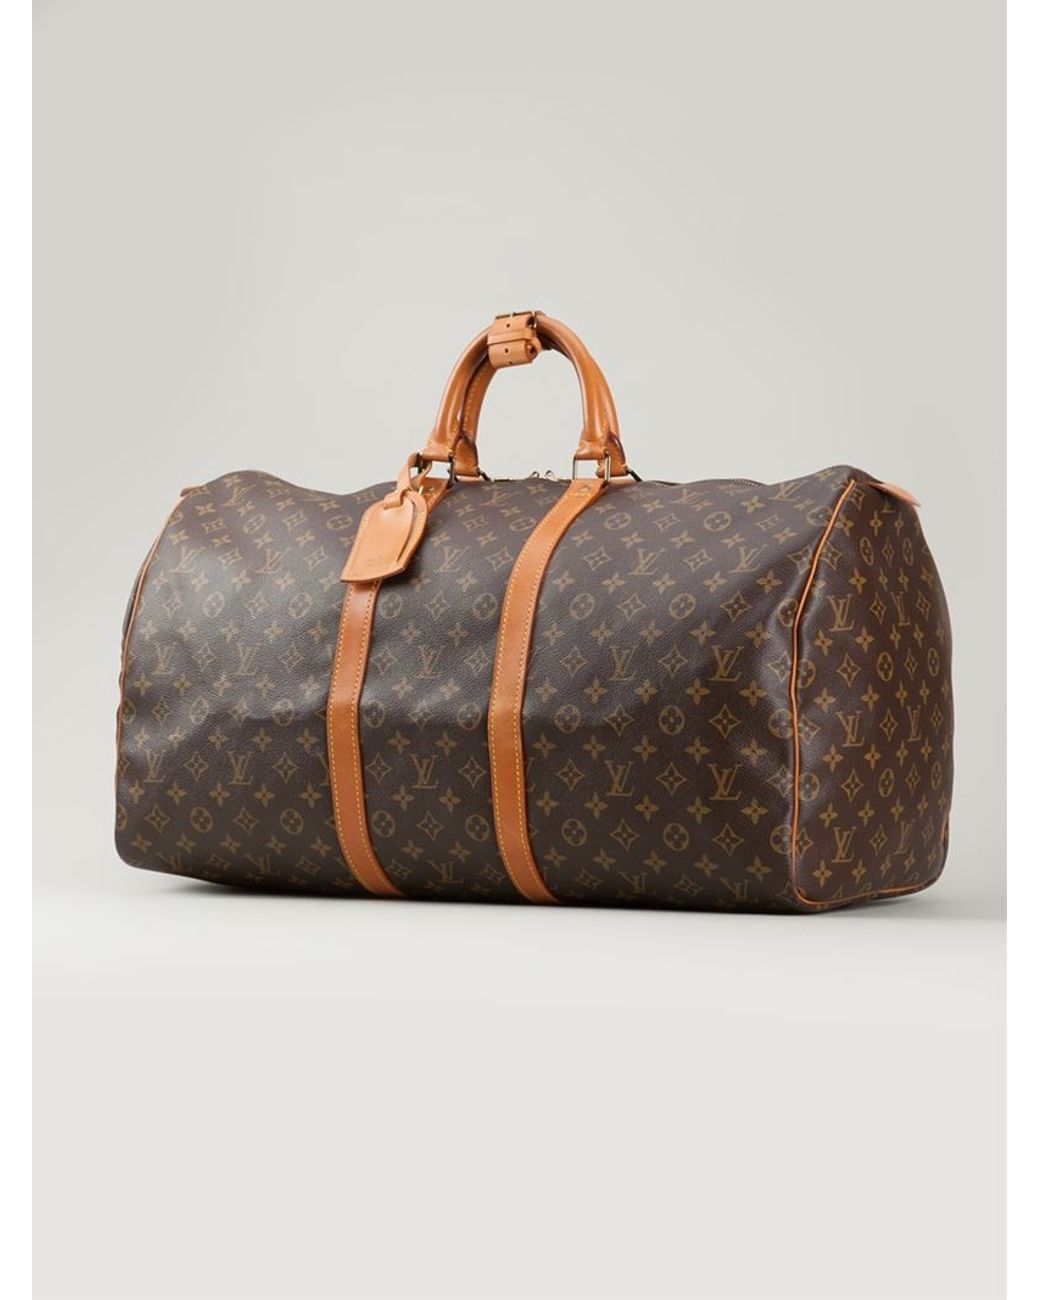 LOUIS VUITTON. Travel bag Keepall model in brown canvas …